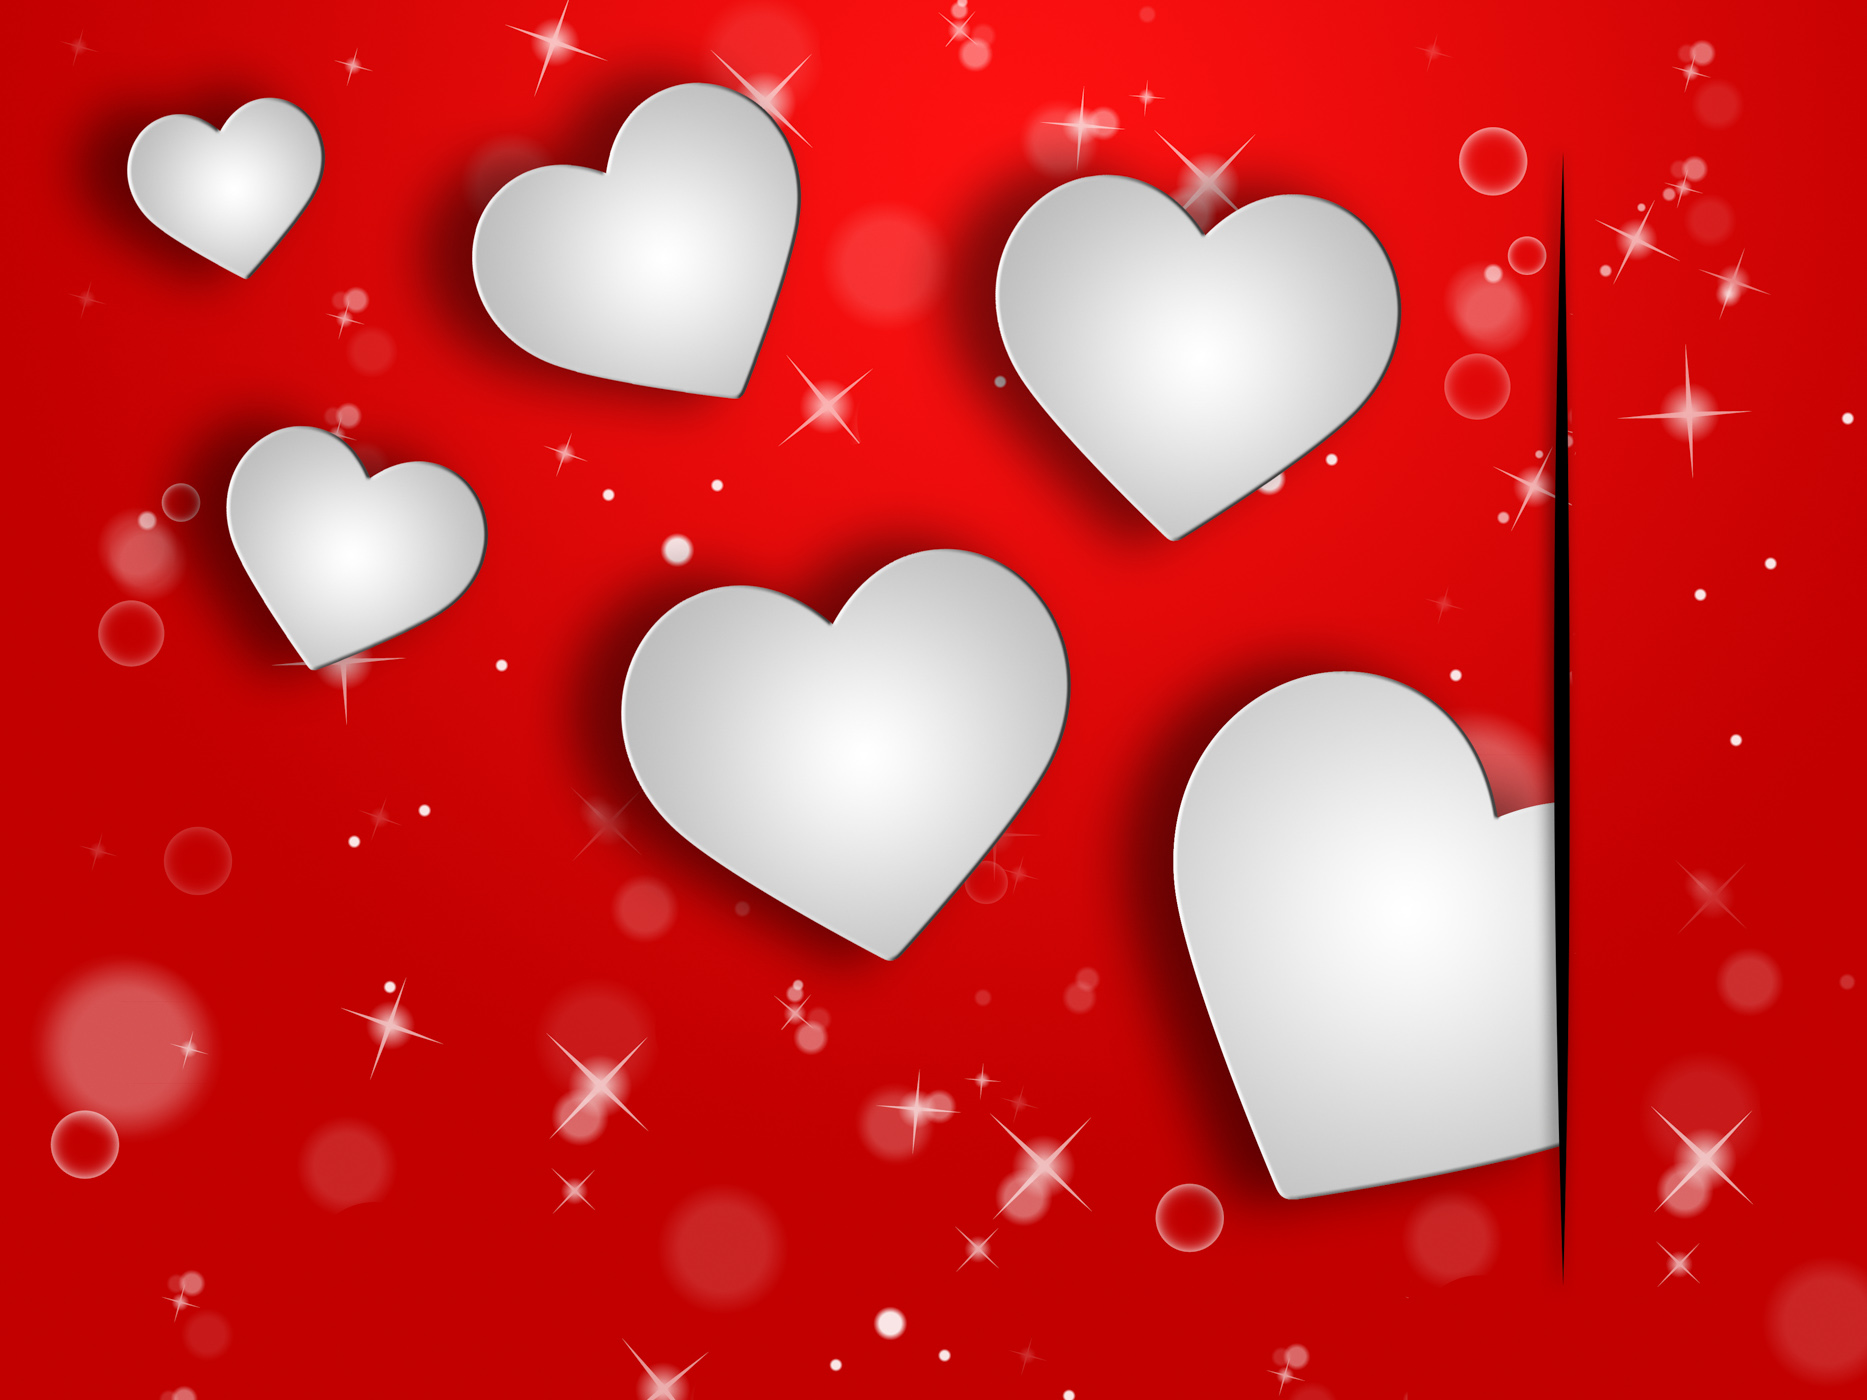 Hearts background represents valentines day and abstract photo